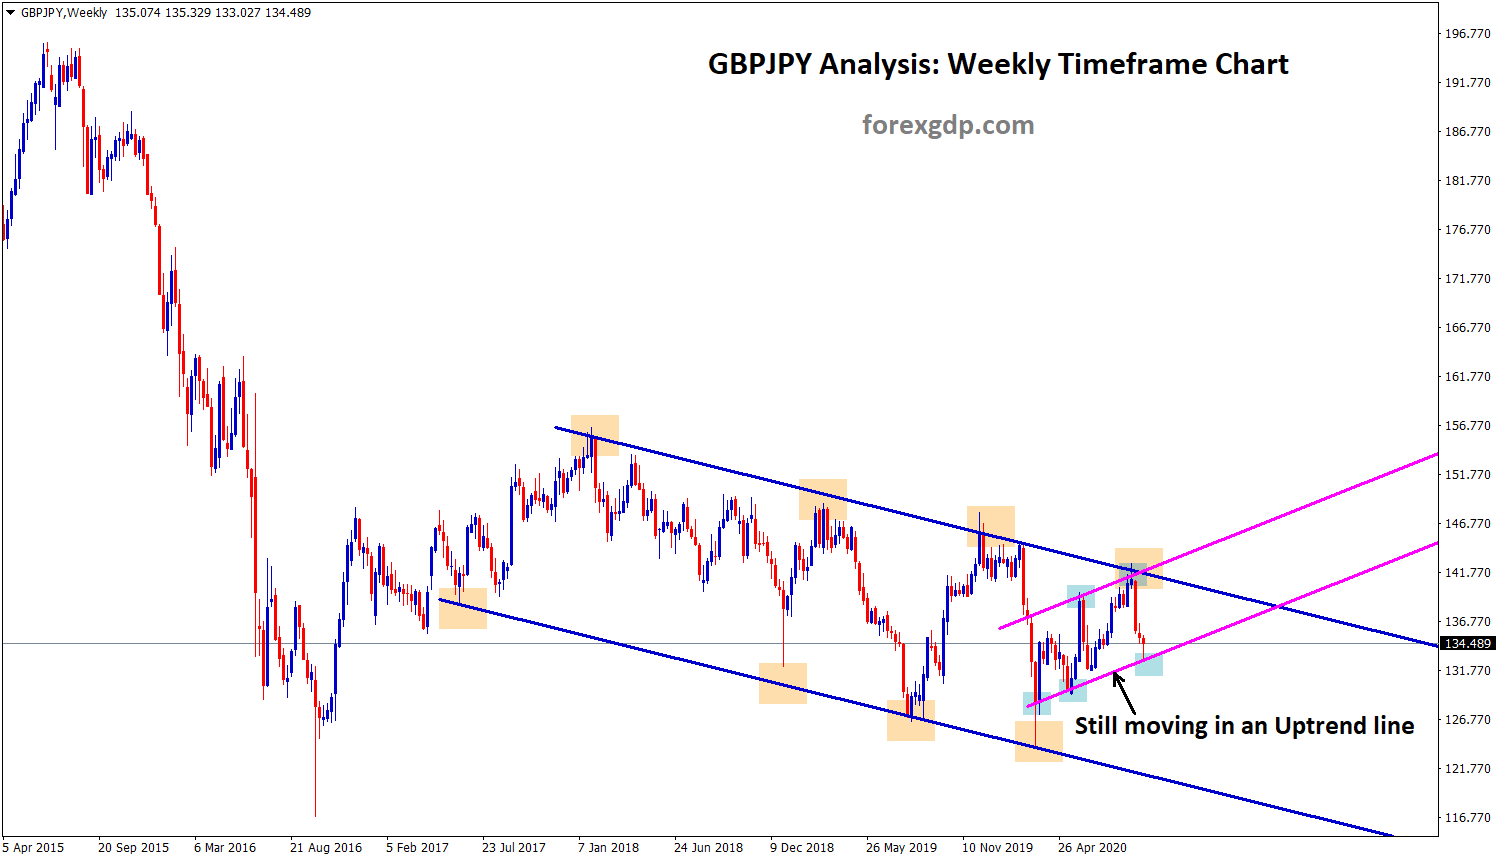 gbpjpy still moving in an uptrend line